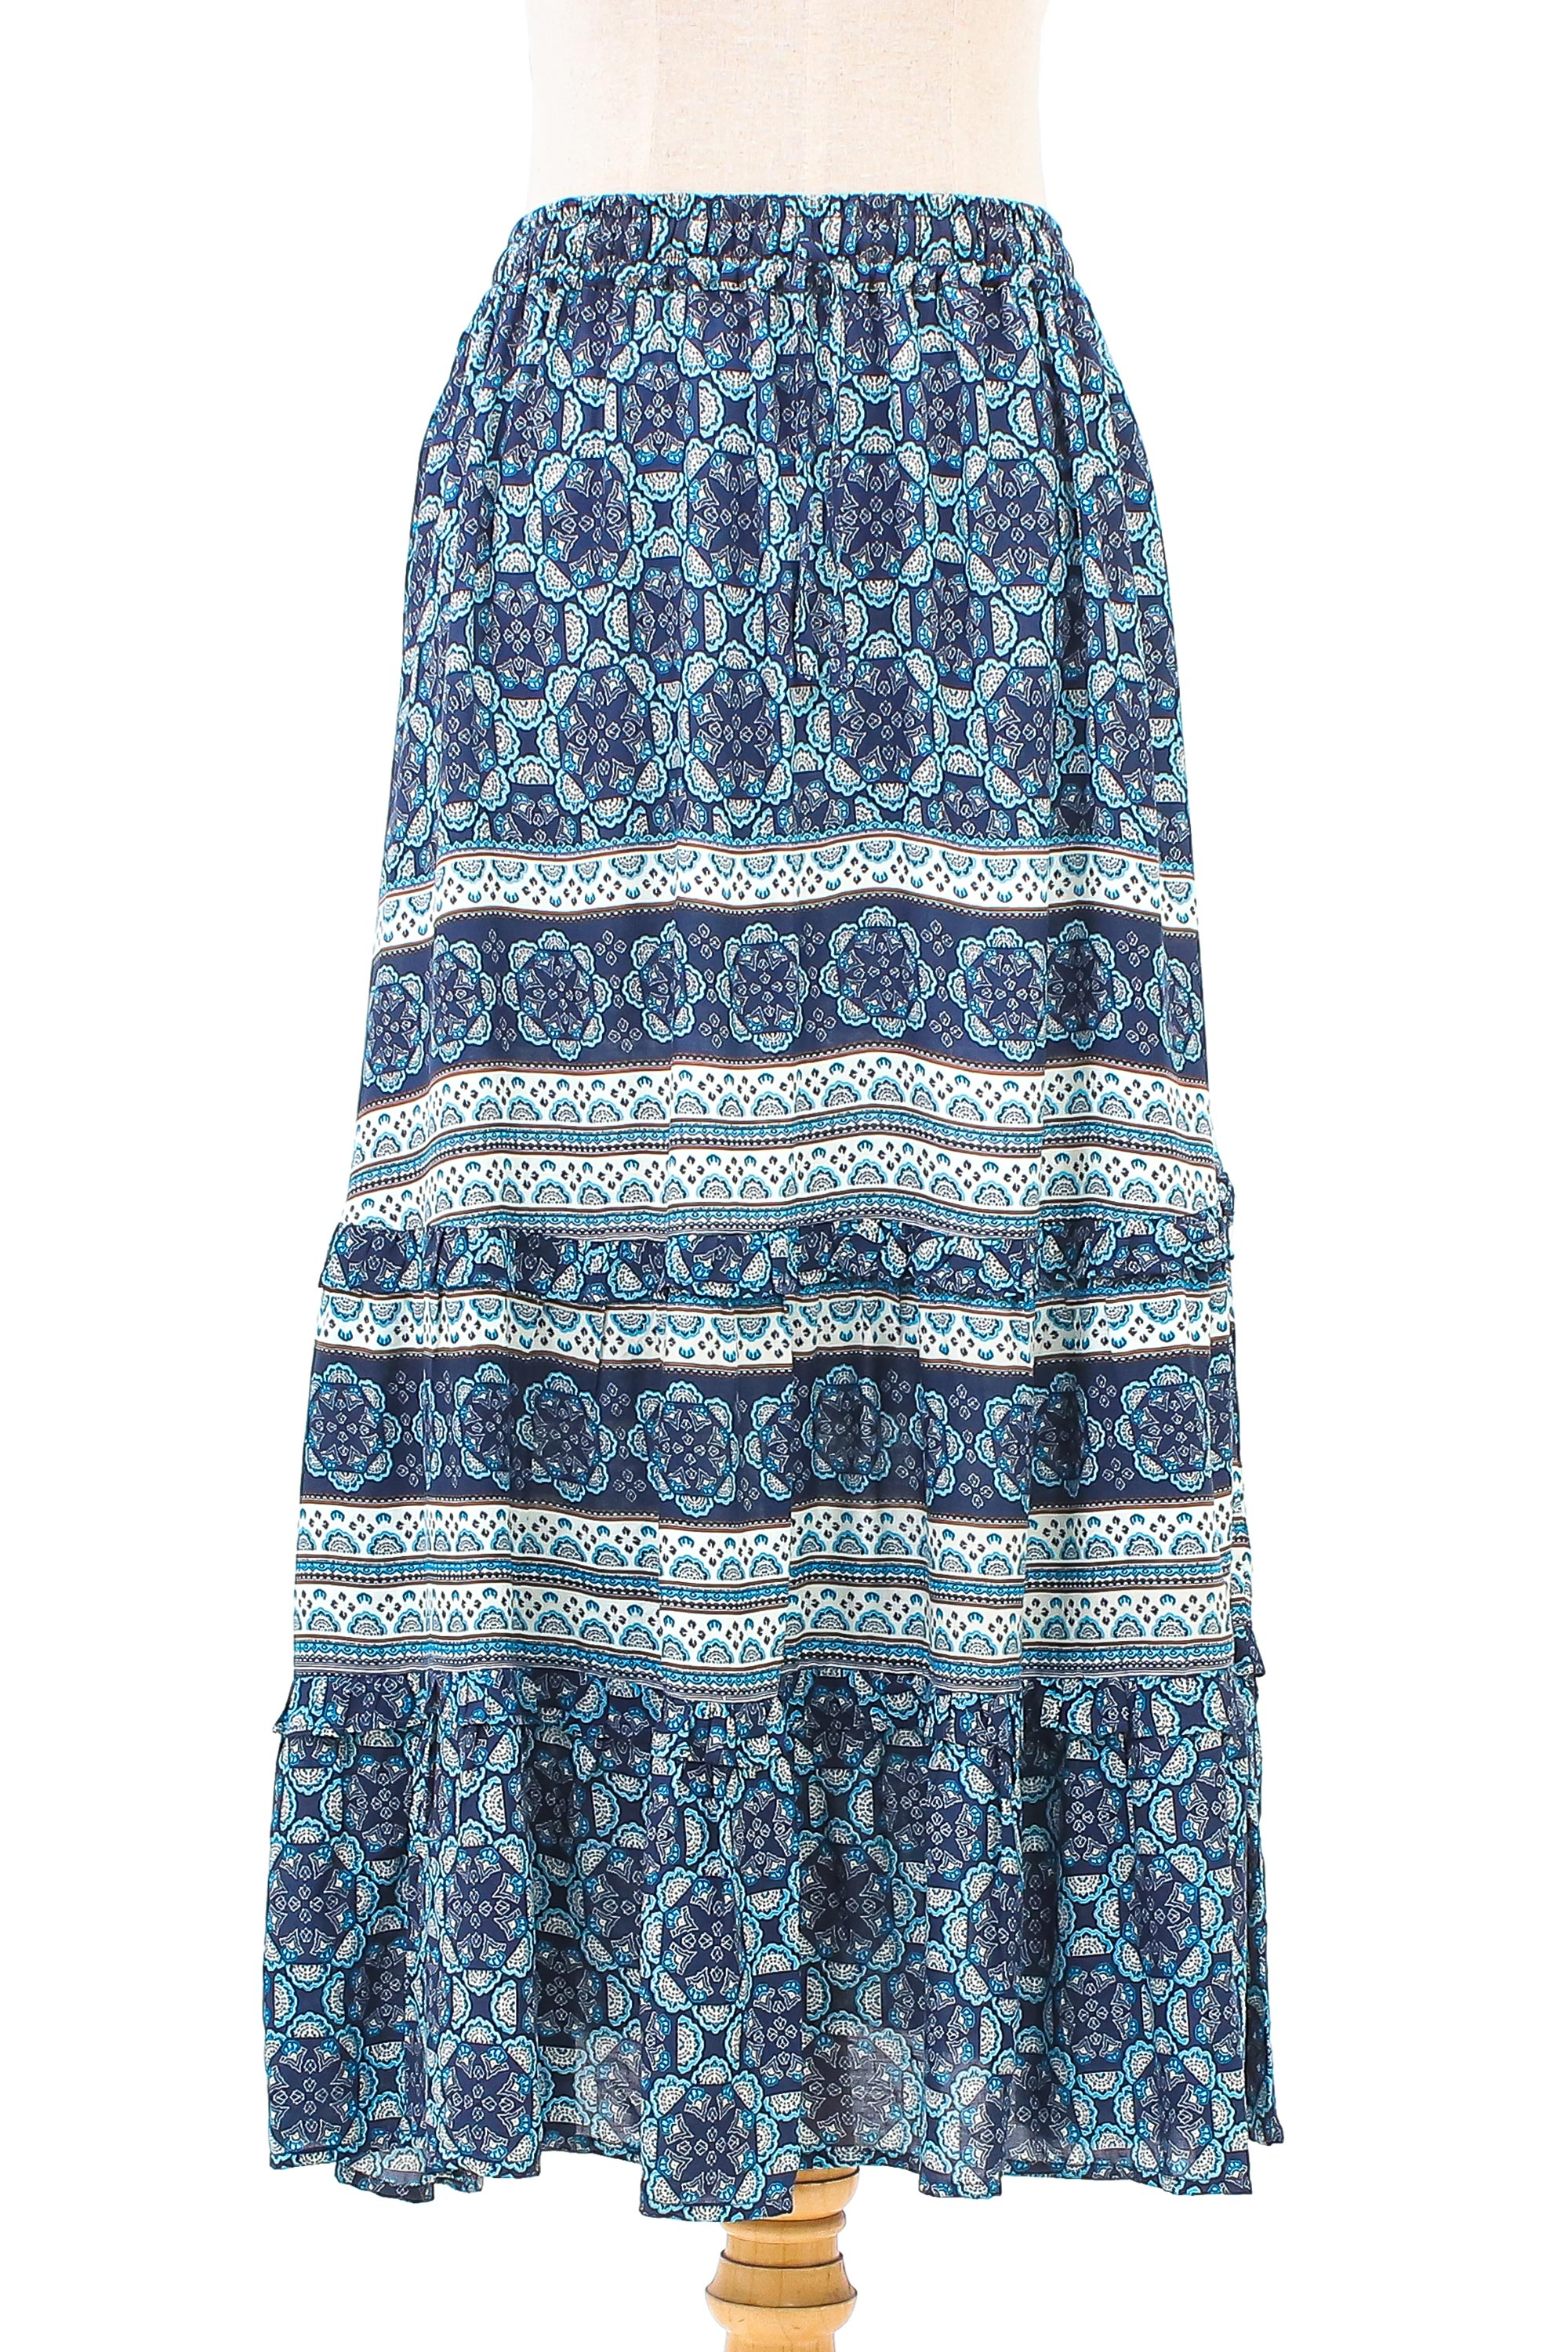 Floral Motif Printed Rayon Skirt from Thailand - Fascinating Night | NOVICA